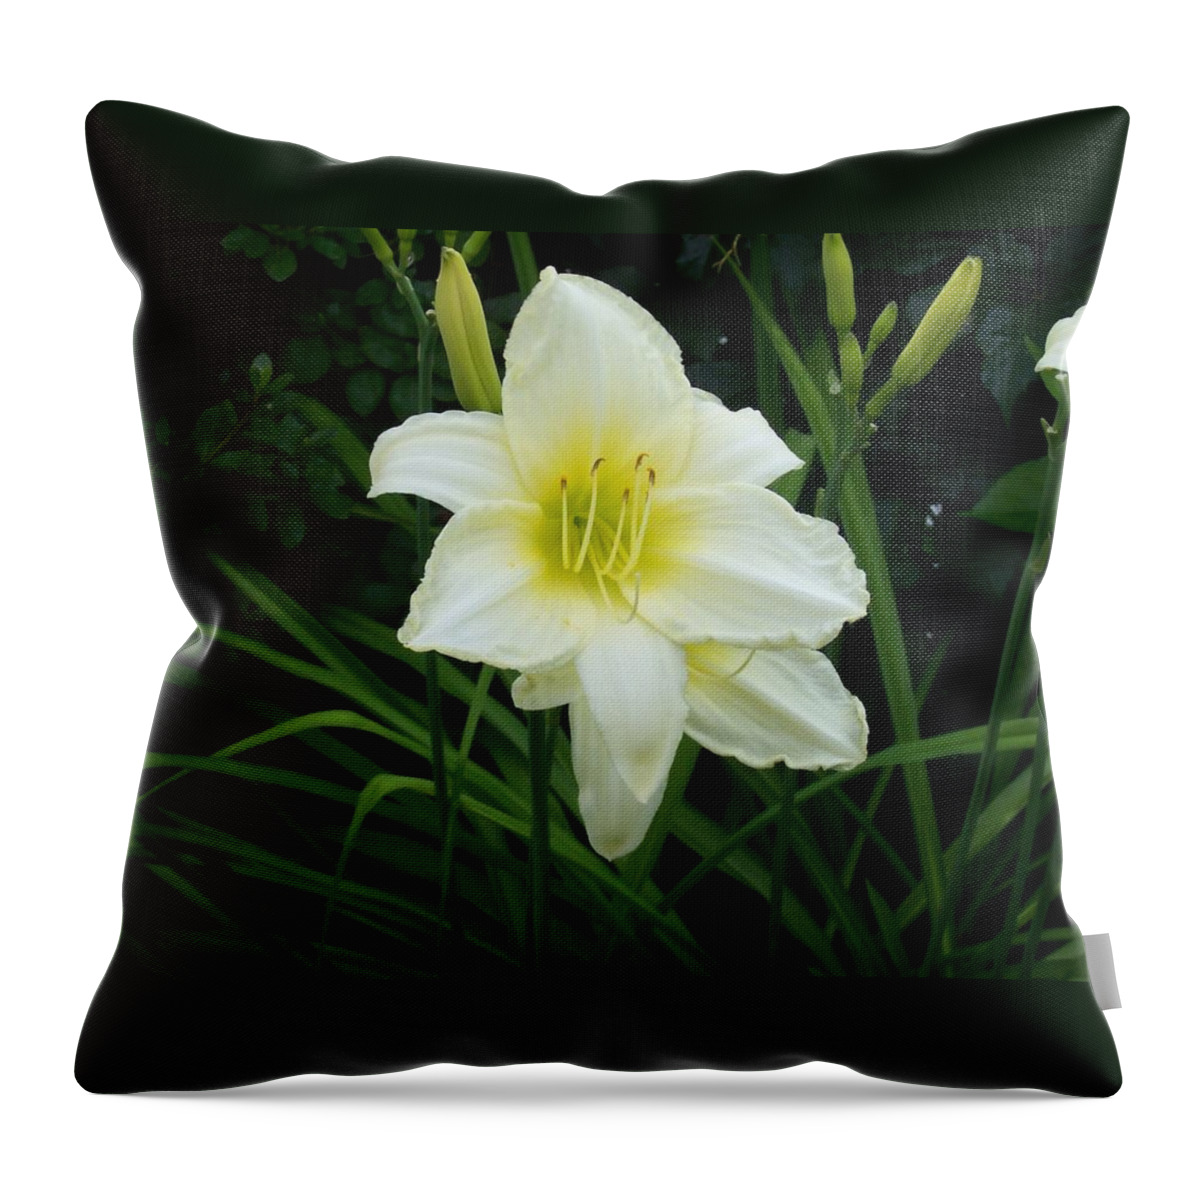 Flowers Photographs Throw Pillow featuring the photograph White Lily by Catherine Gagne